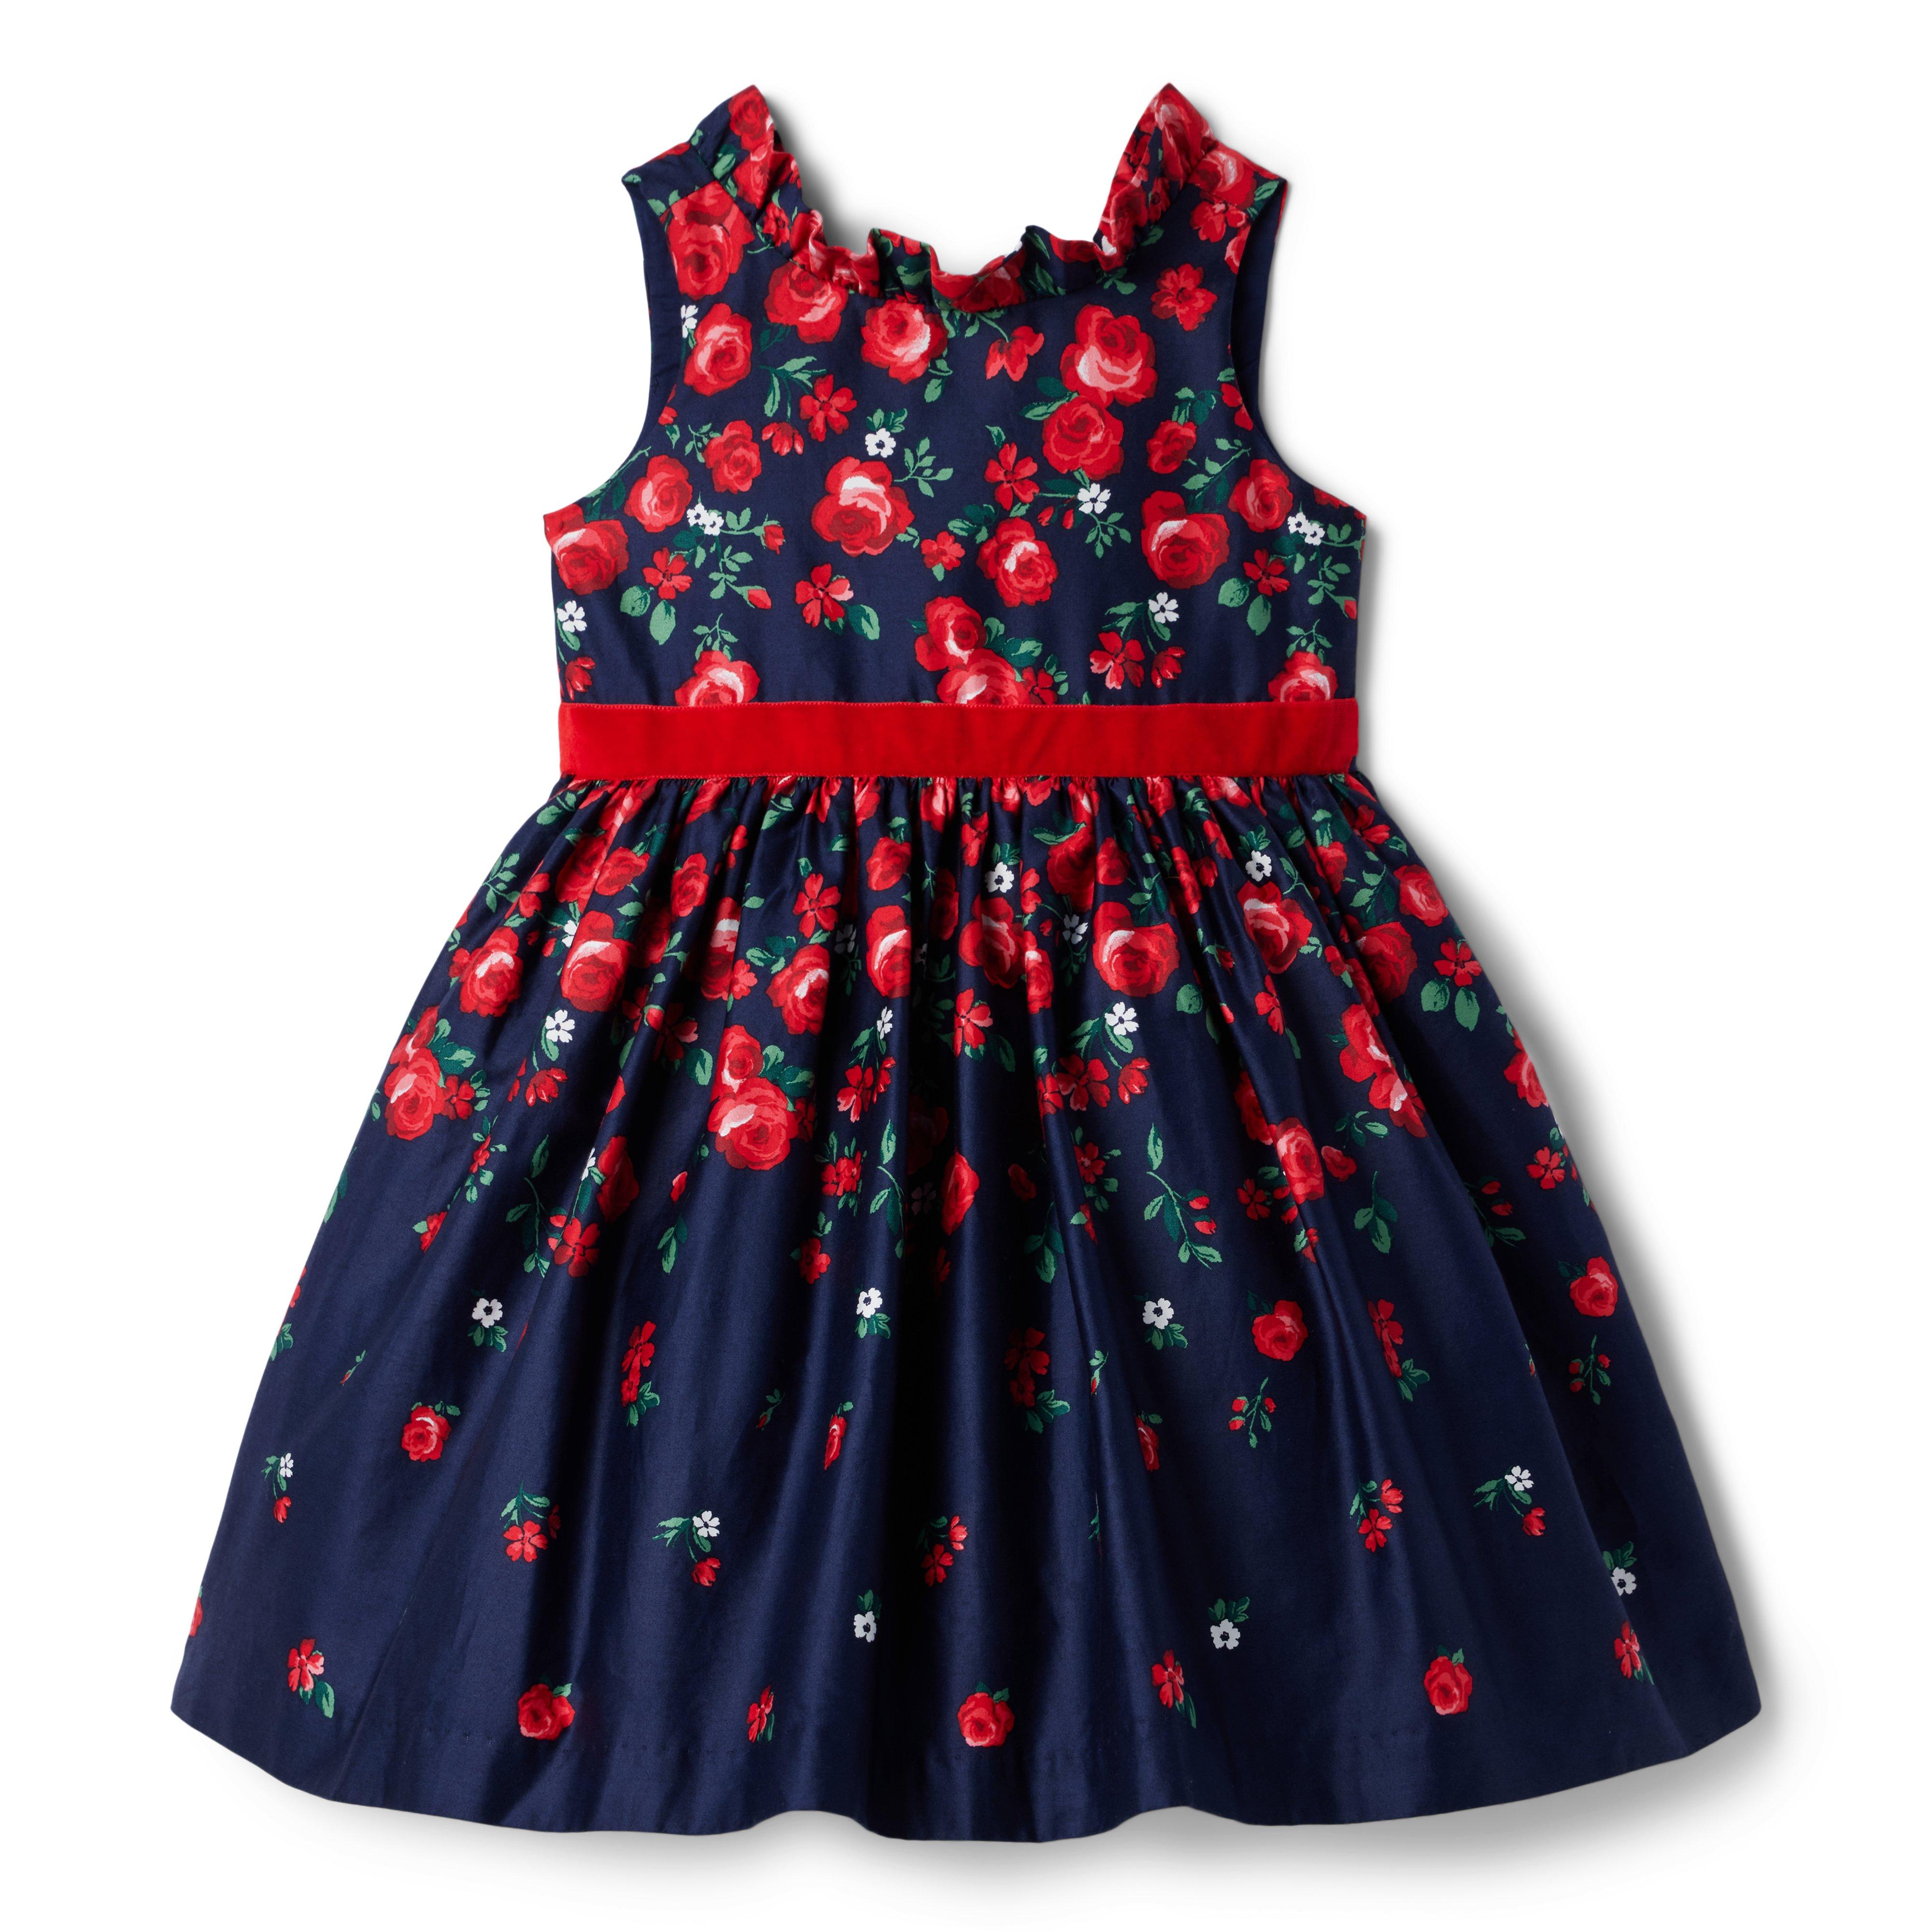 American Girl® x Janie and Jack Wrapped In Roses Party Dress